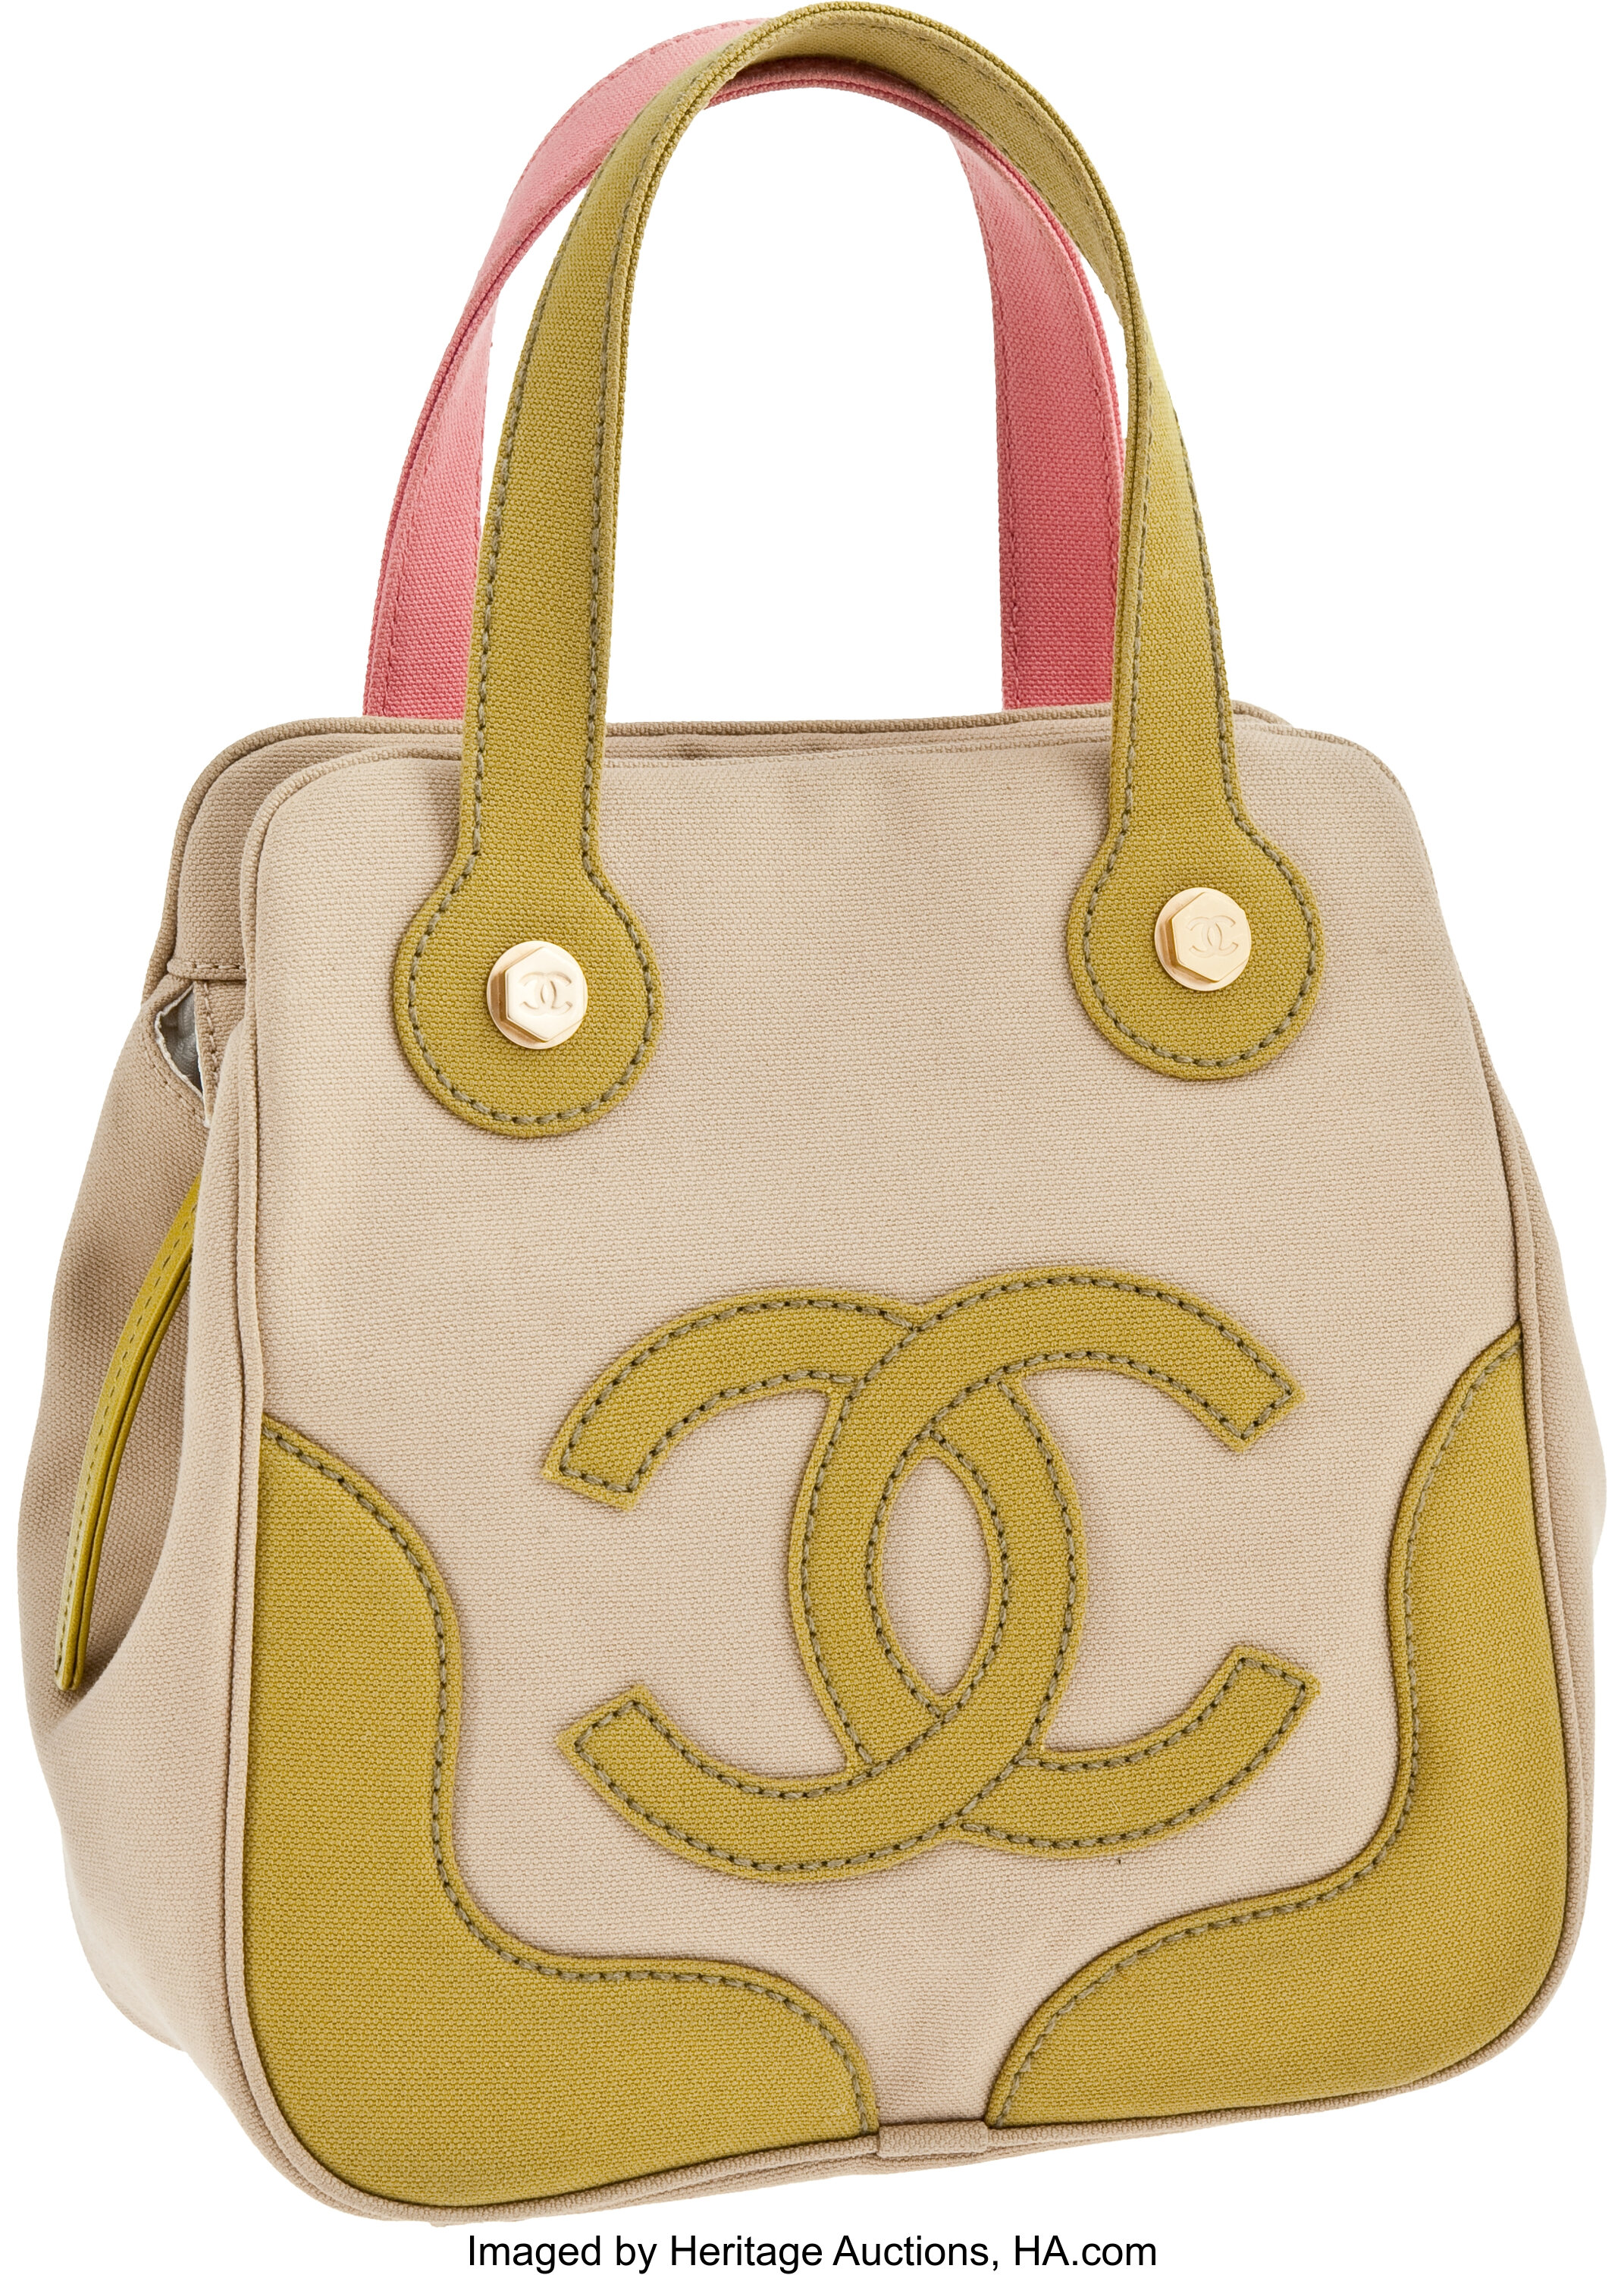 Chanel Canvas Bag with Pink & Green Trim.  Luxury Accessories